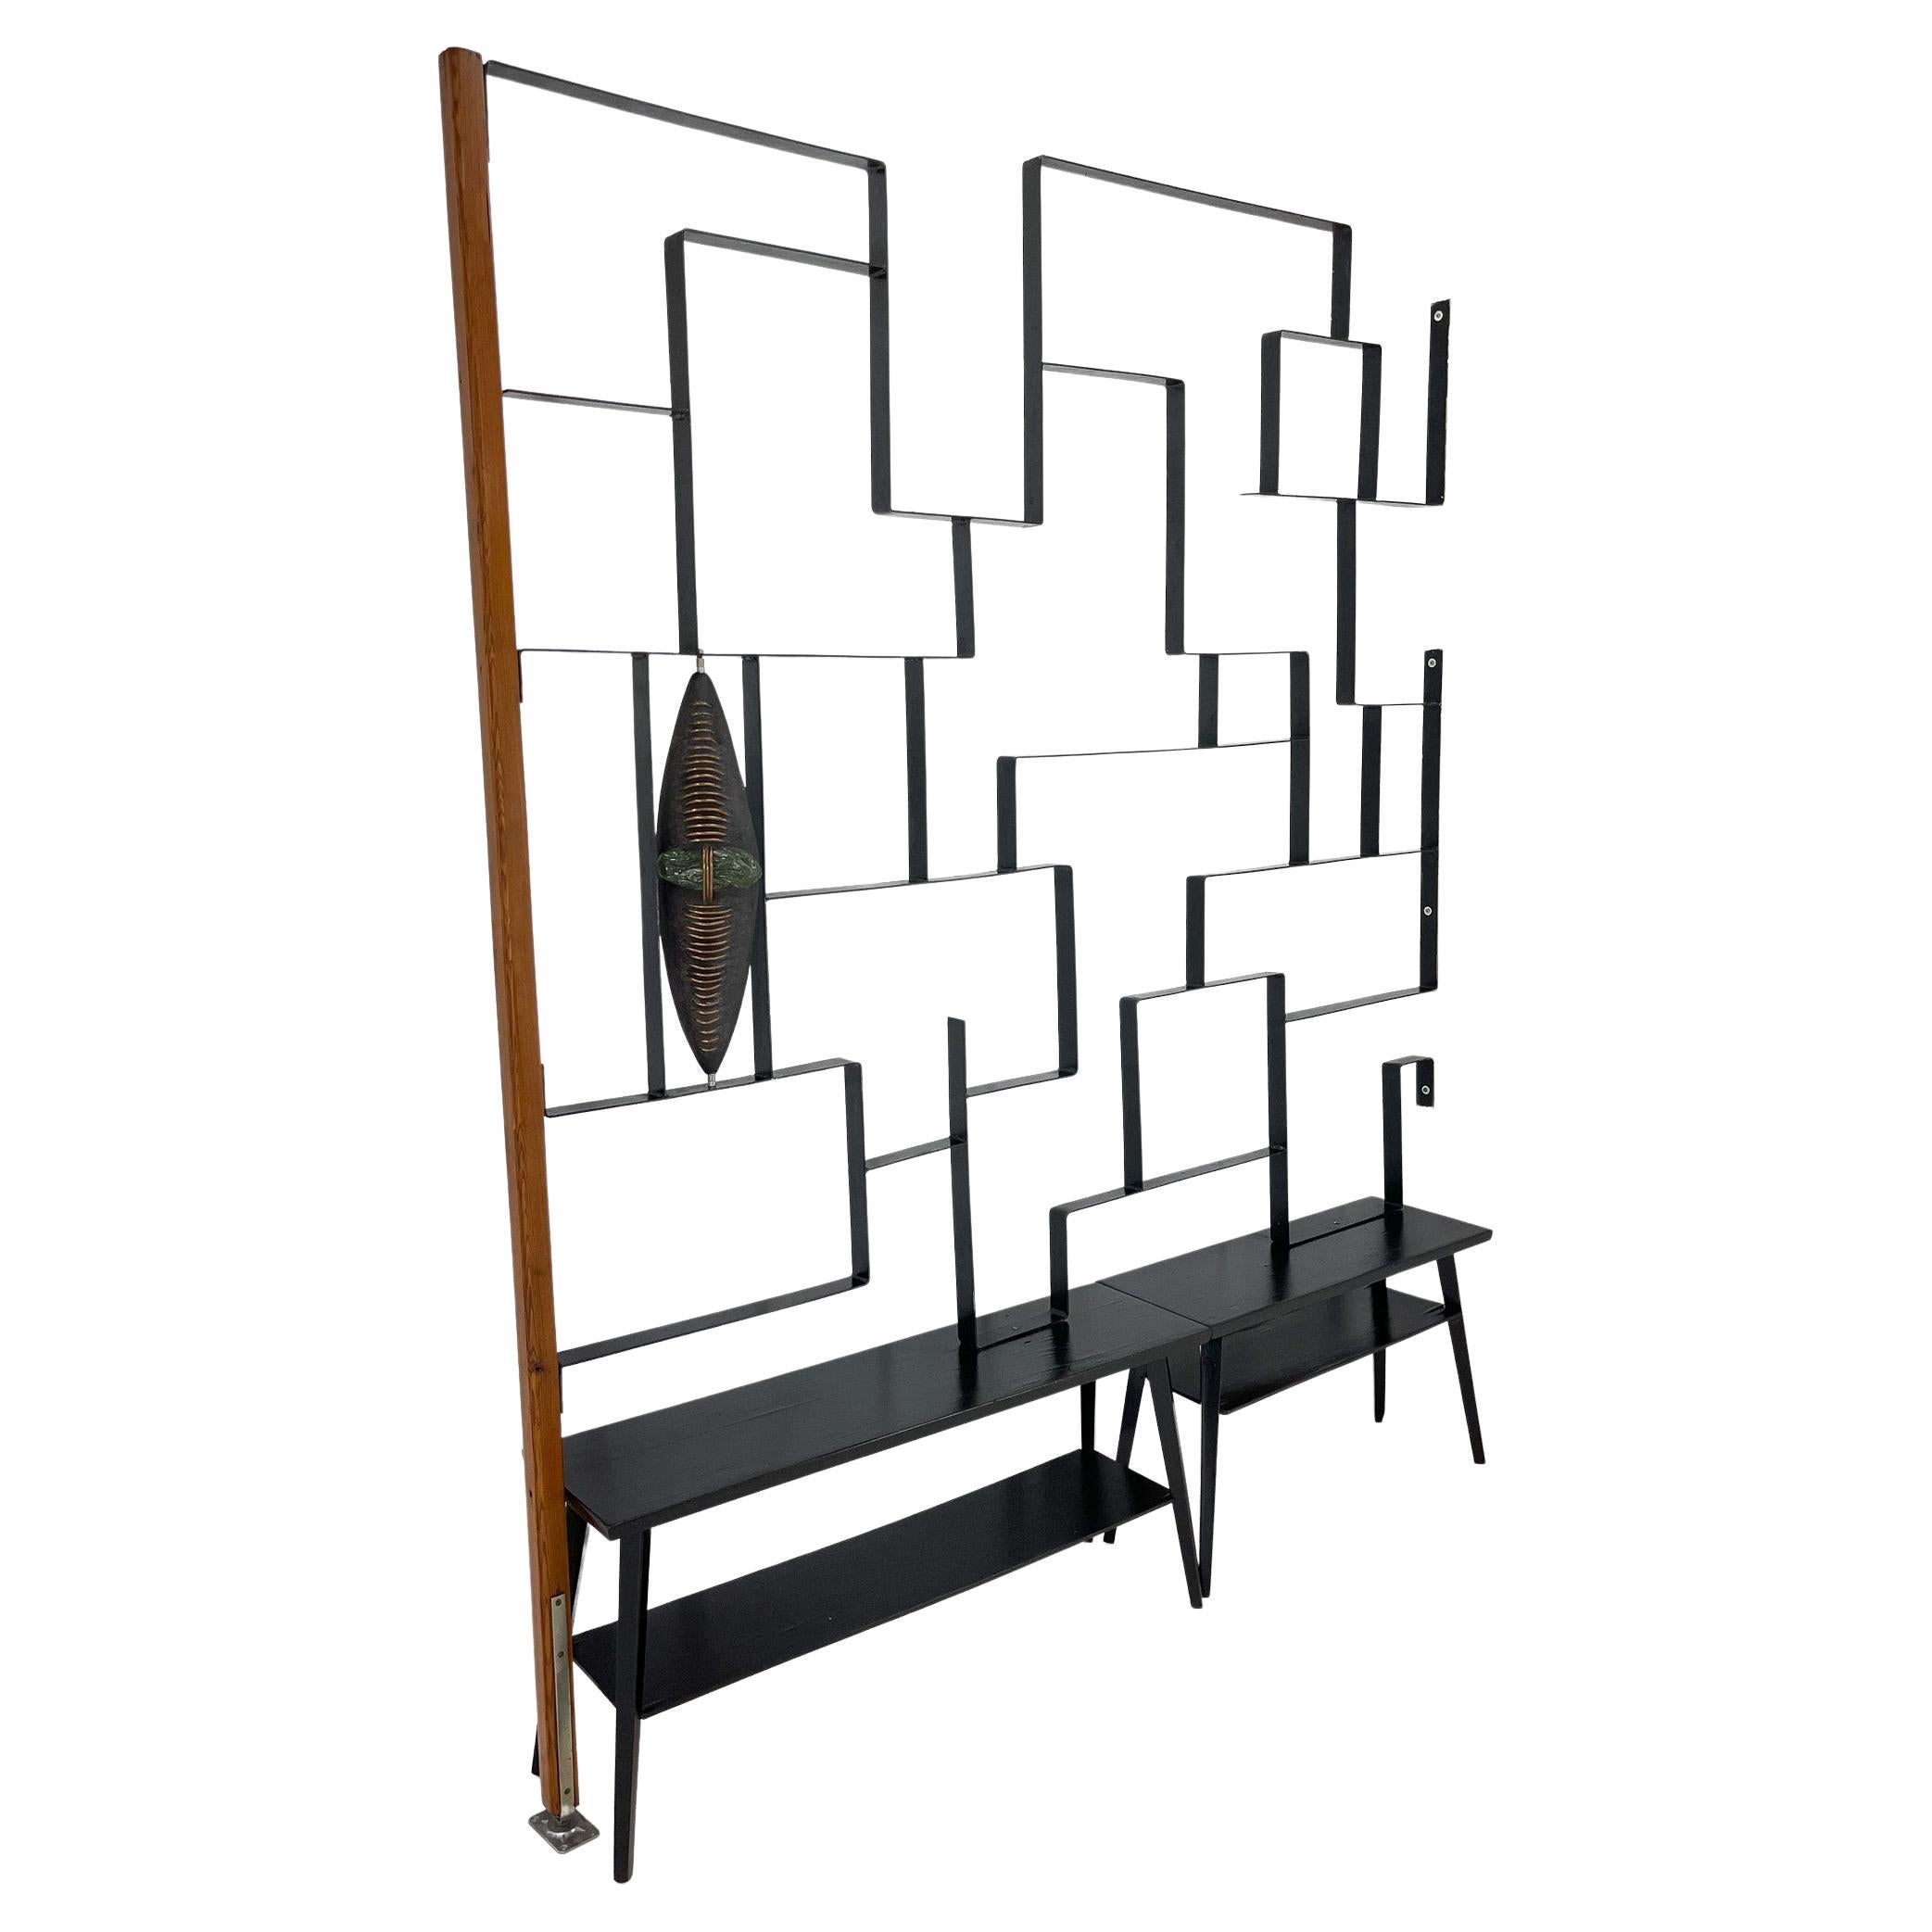 1960's Art Wall Unit or Room Divider with Sculpture by Jelínek